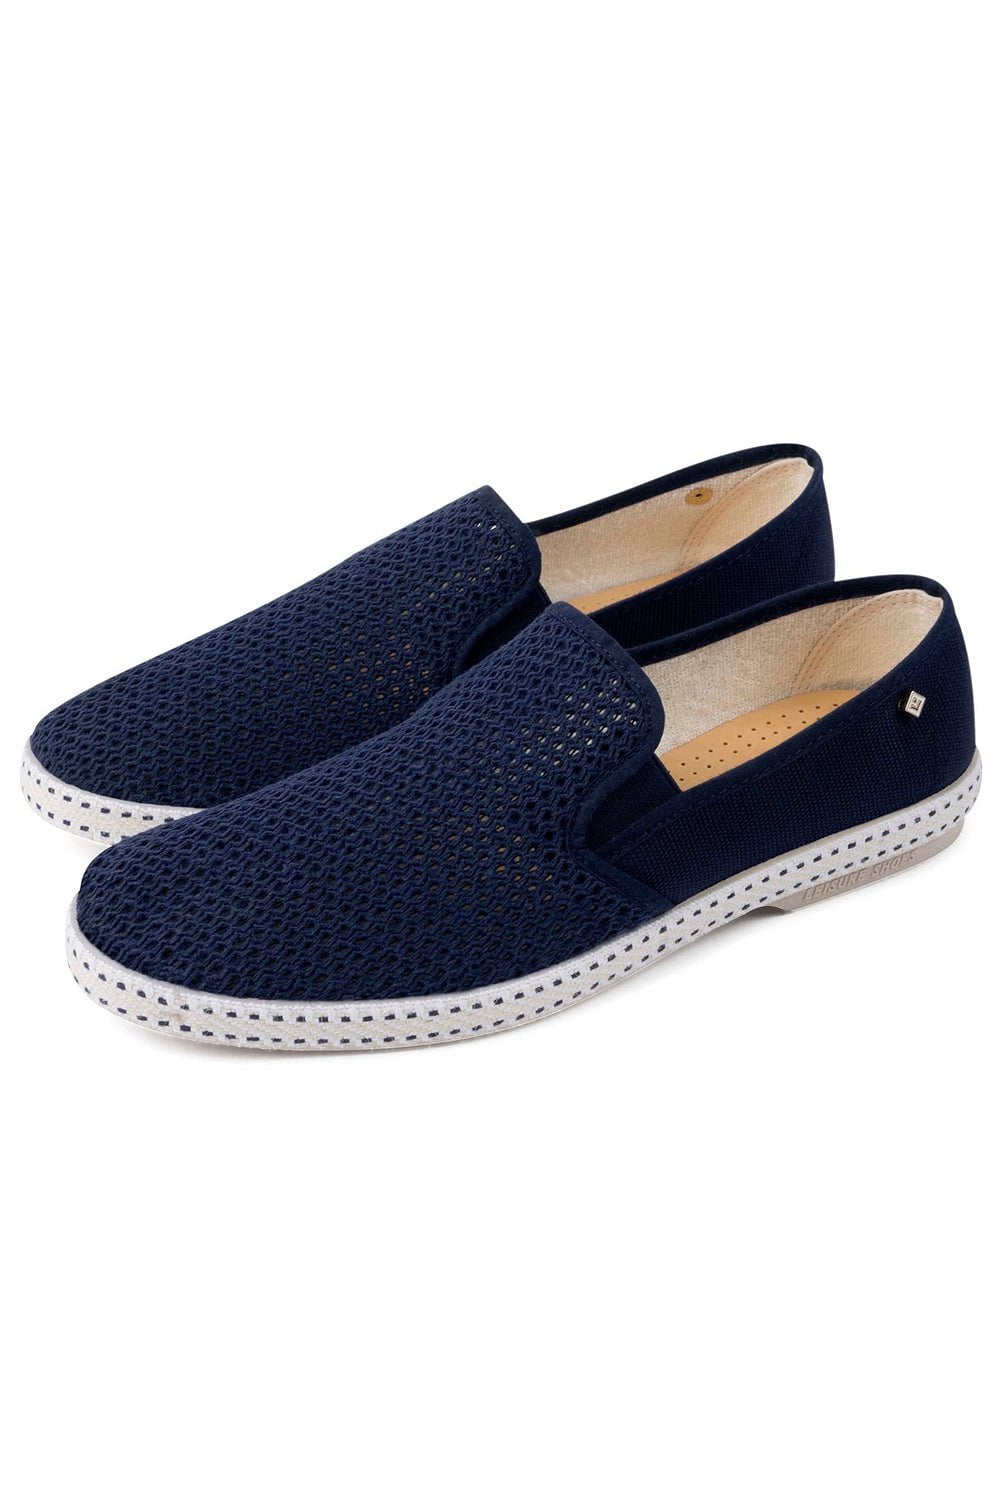 RIVIERAS-Classic Canvas & Mesh Navy Slip On Loafer-